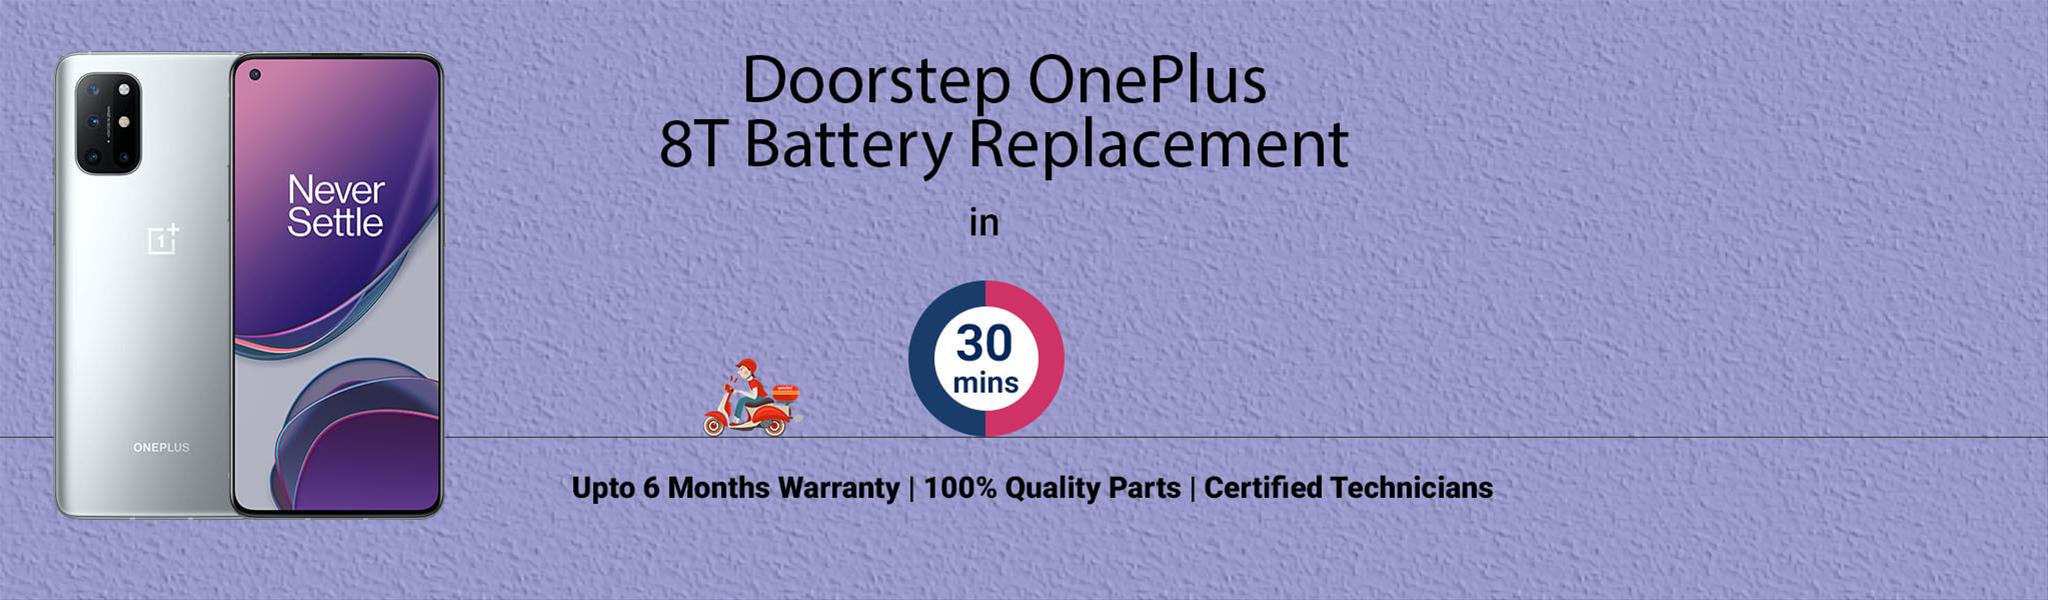 oneplus-8t-battery-replacement.jpg